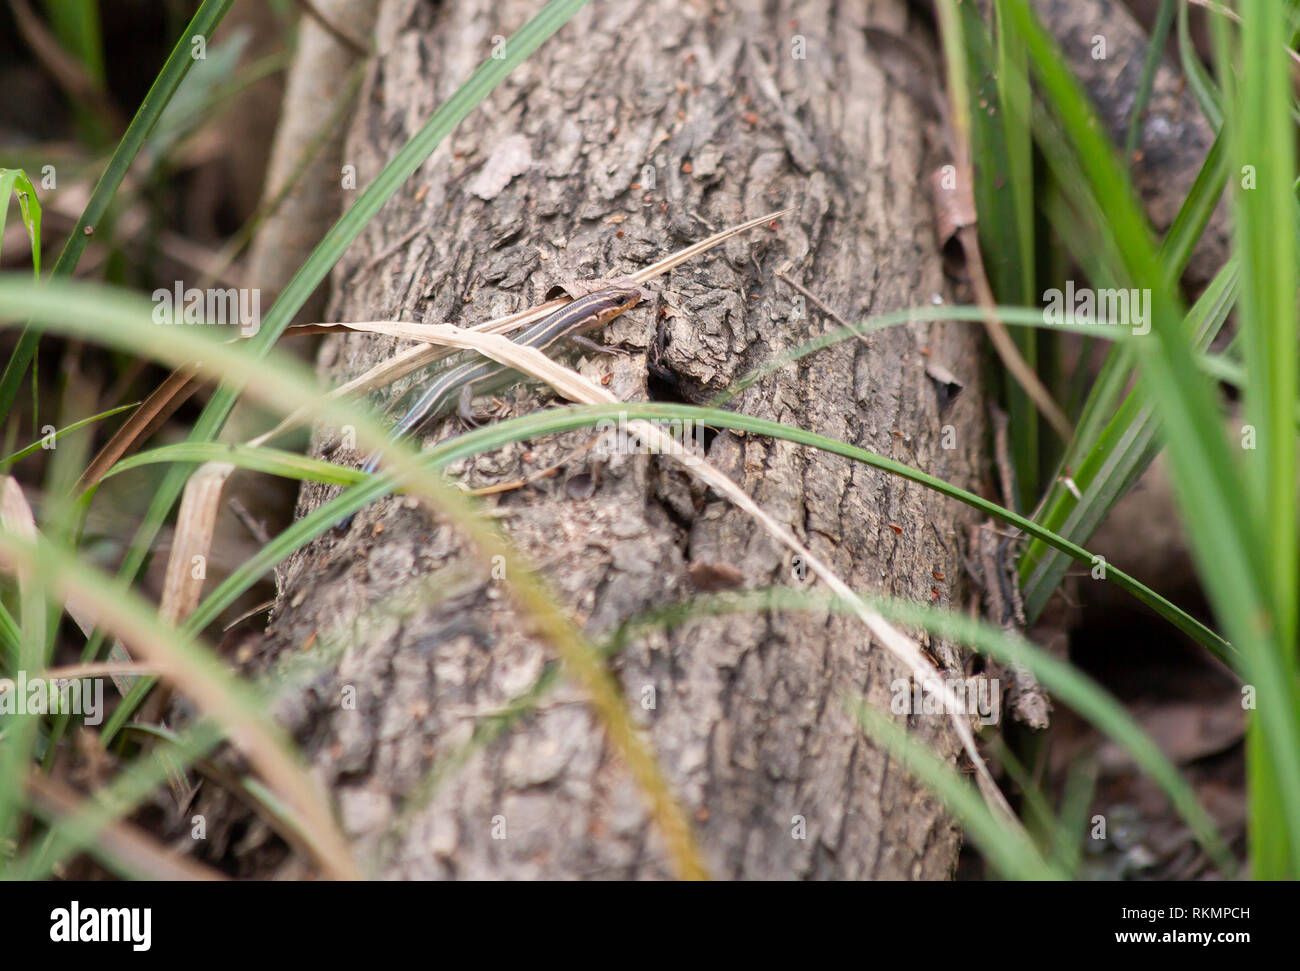 Skink on a log on the forest floor Stock Photo